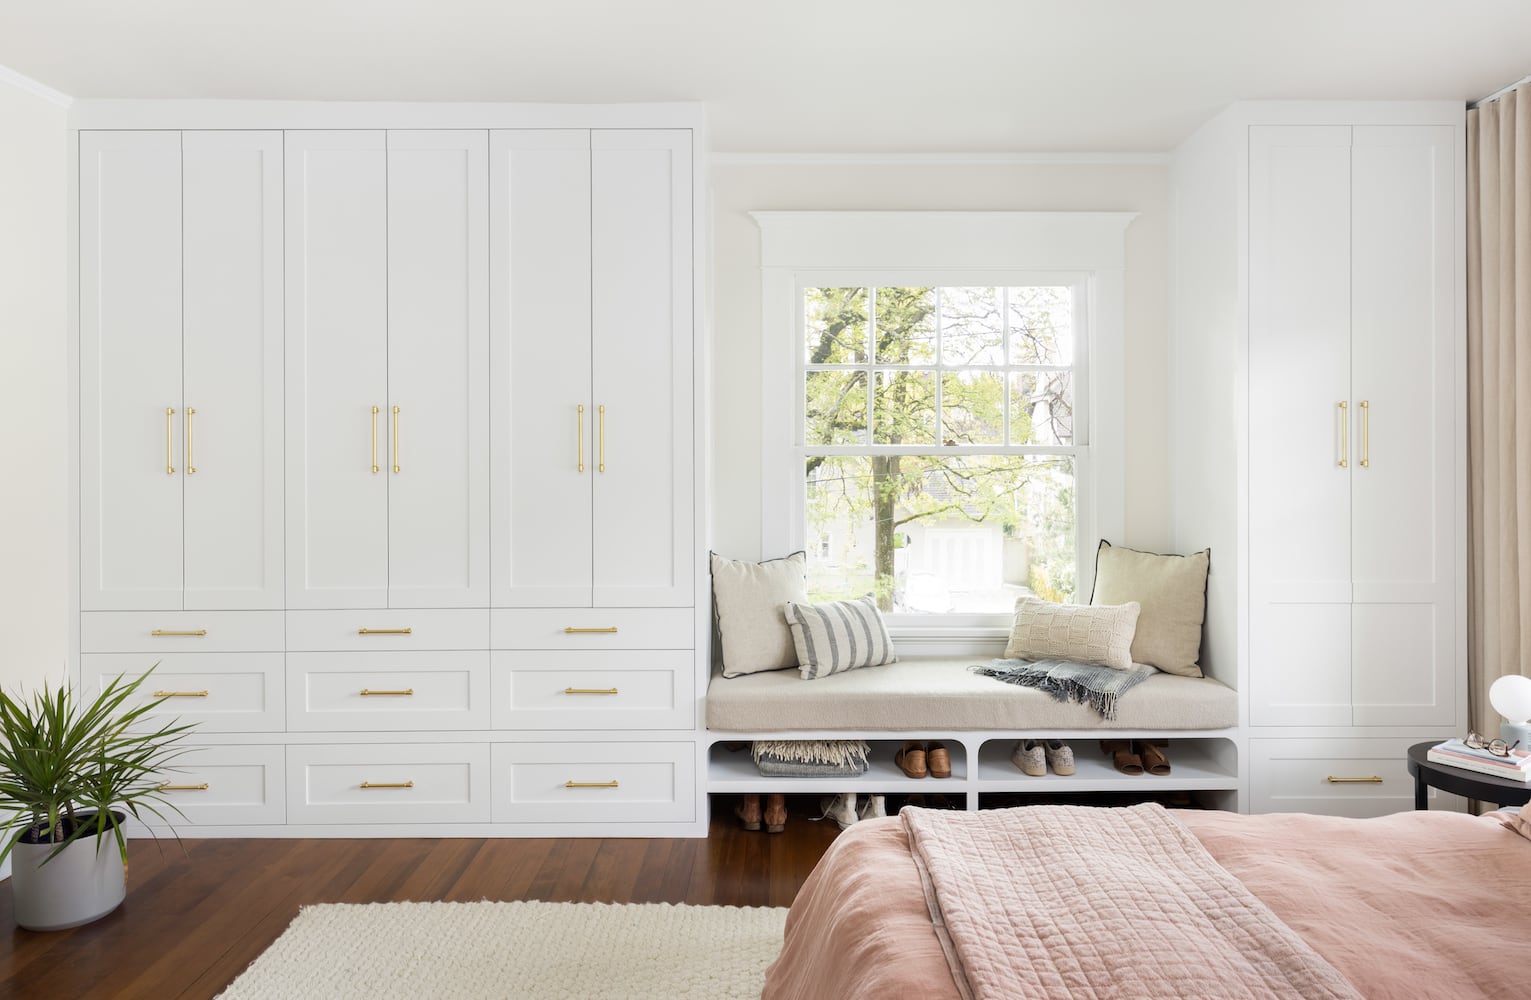 Custom bedroom cabinetry painted white with gold cabinet pulls for doors and drawers